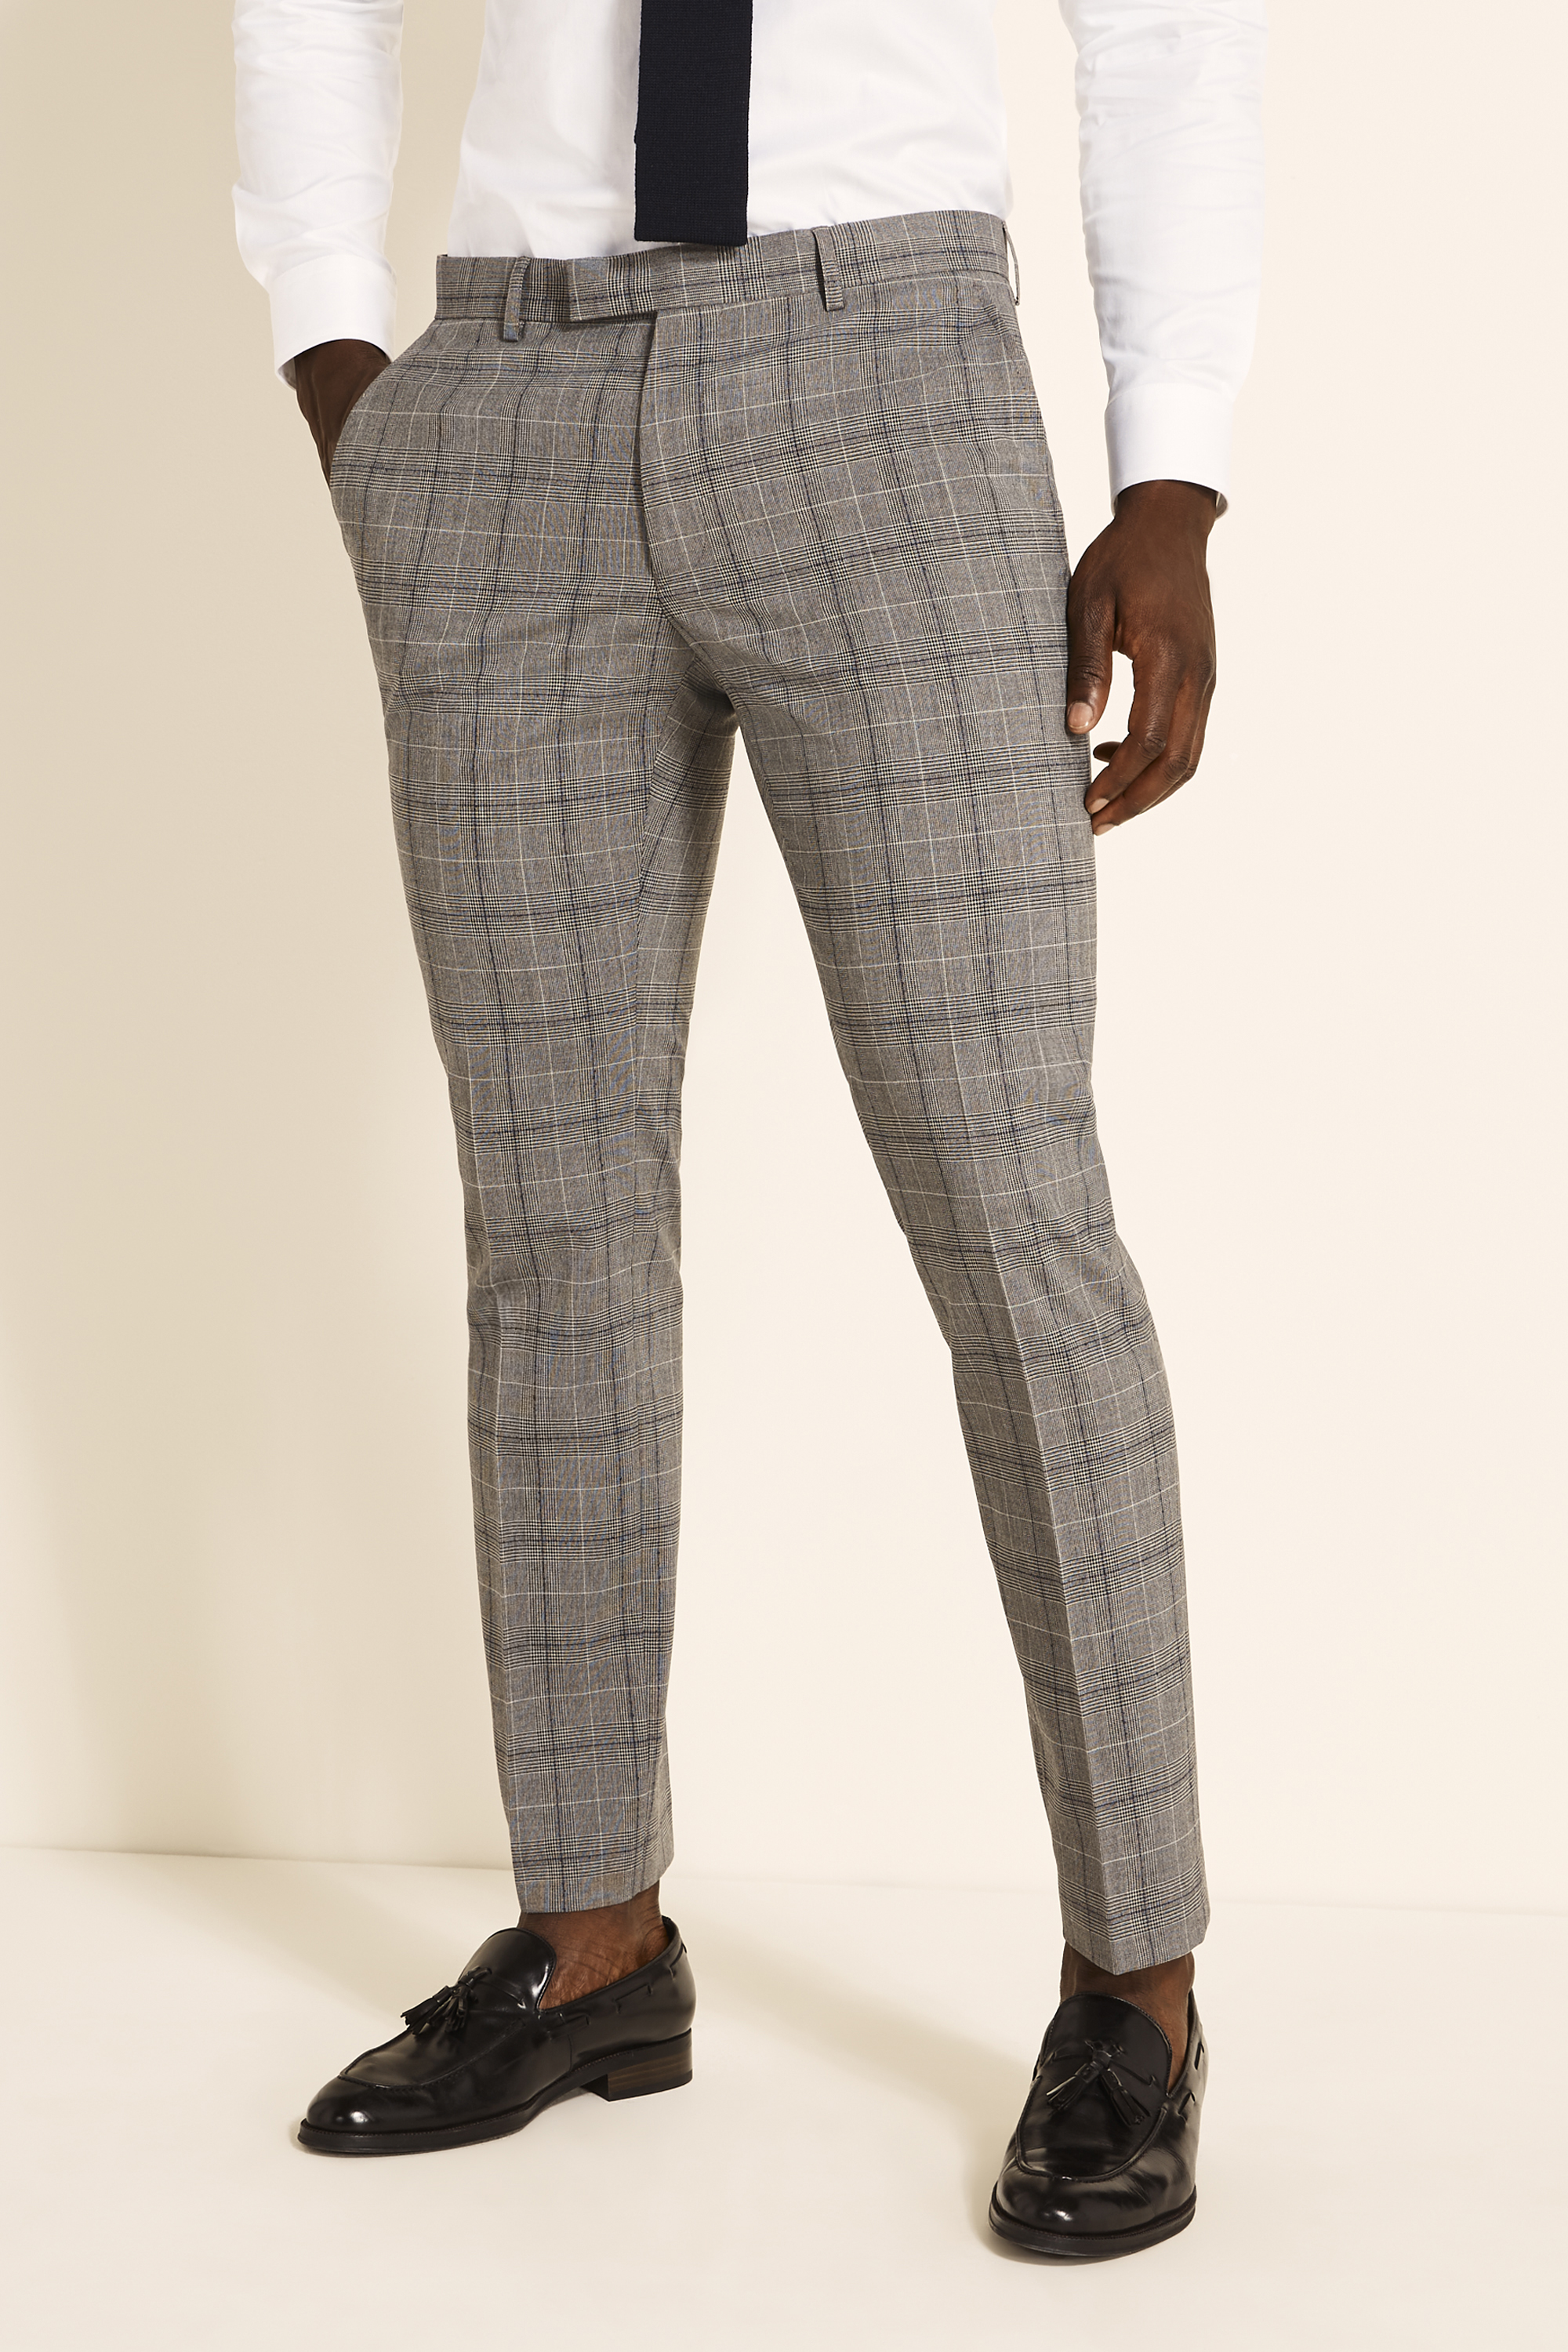 Slim Fit Grey Navy Check Trousers | Buy Online at Moss